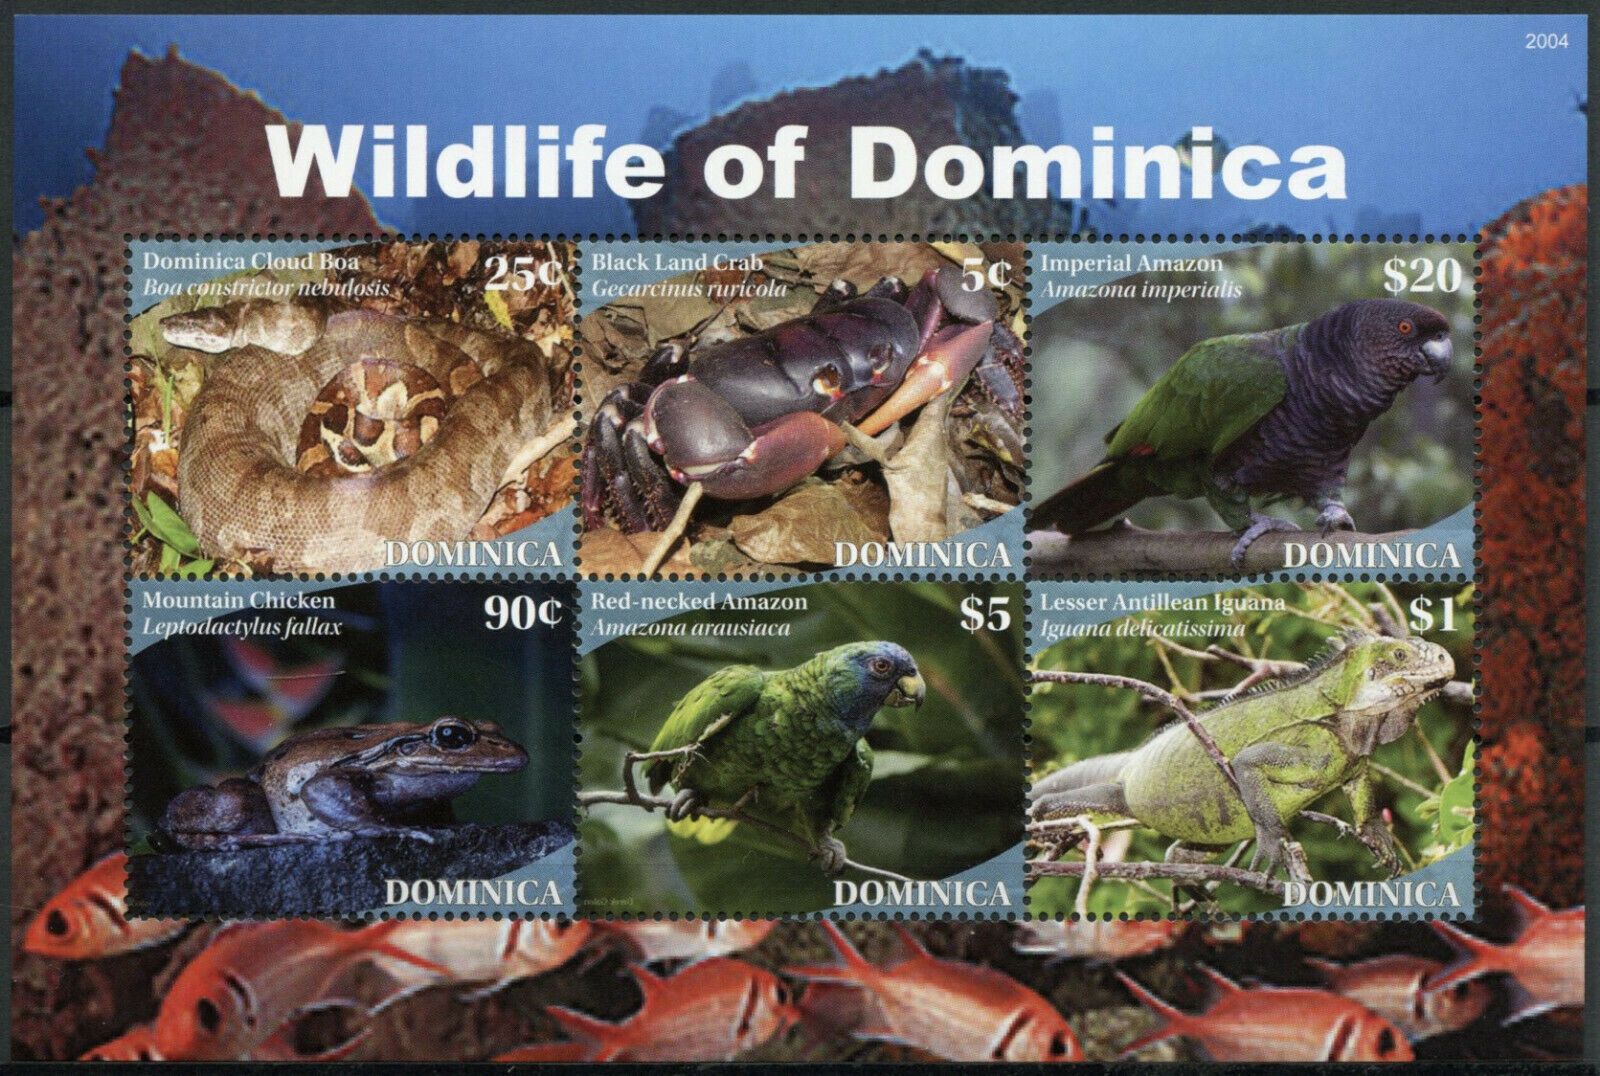 Dominica 2020 MNH Birds on Stamps Wildlife of Dominica Parrots Frogs Snakes Lizards 6v M/S